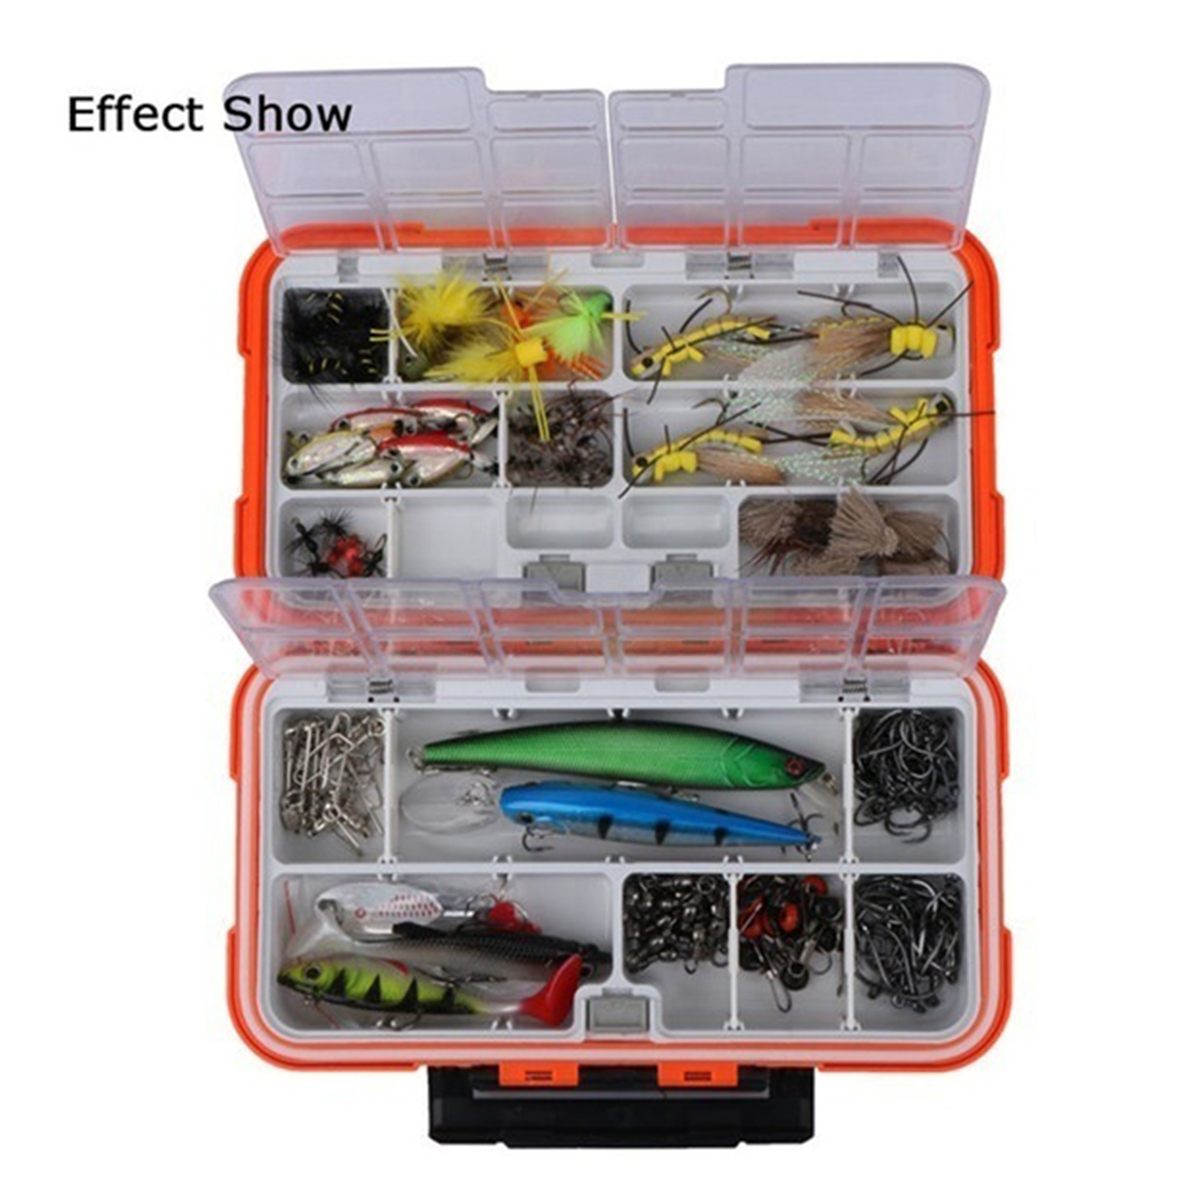 Sealed-Waterproof-Fishing-Tackle-Tray-ABS-Plastic-Fishing-Accessories-Box-Swivel-Snap-Lure--Parts-St-1634862-4